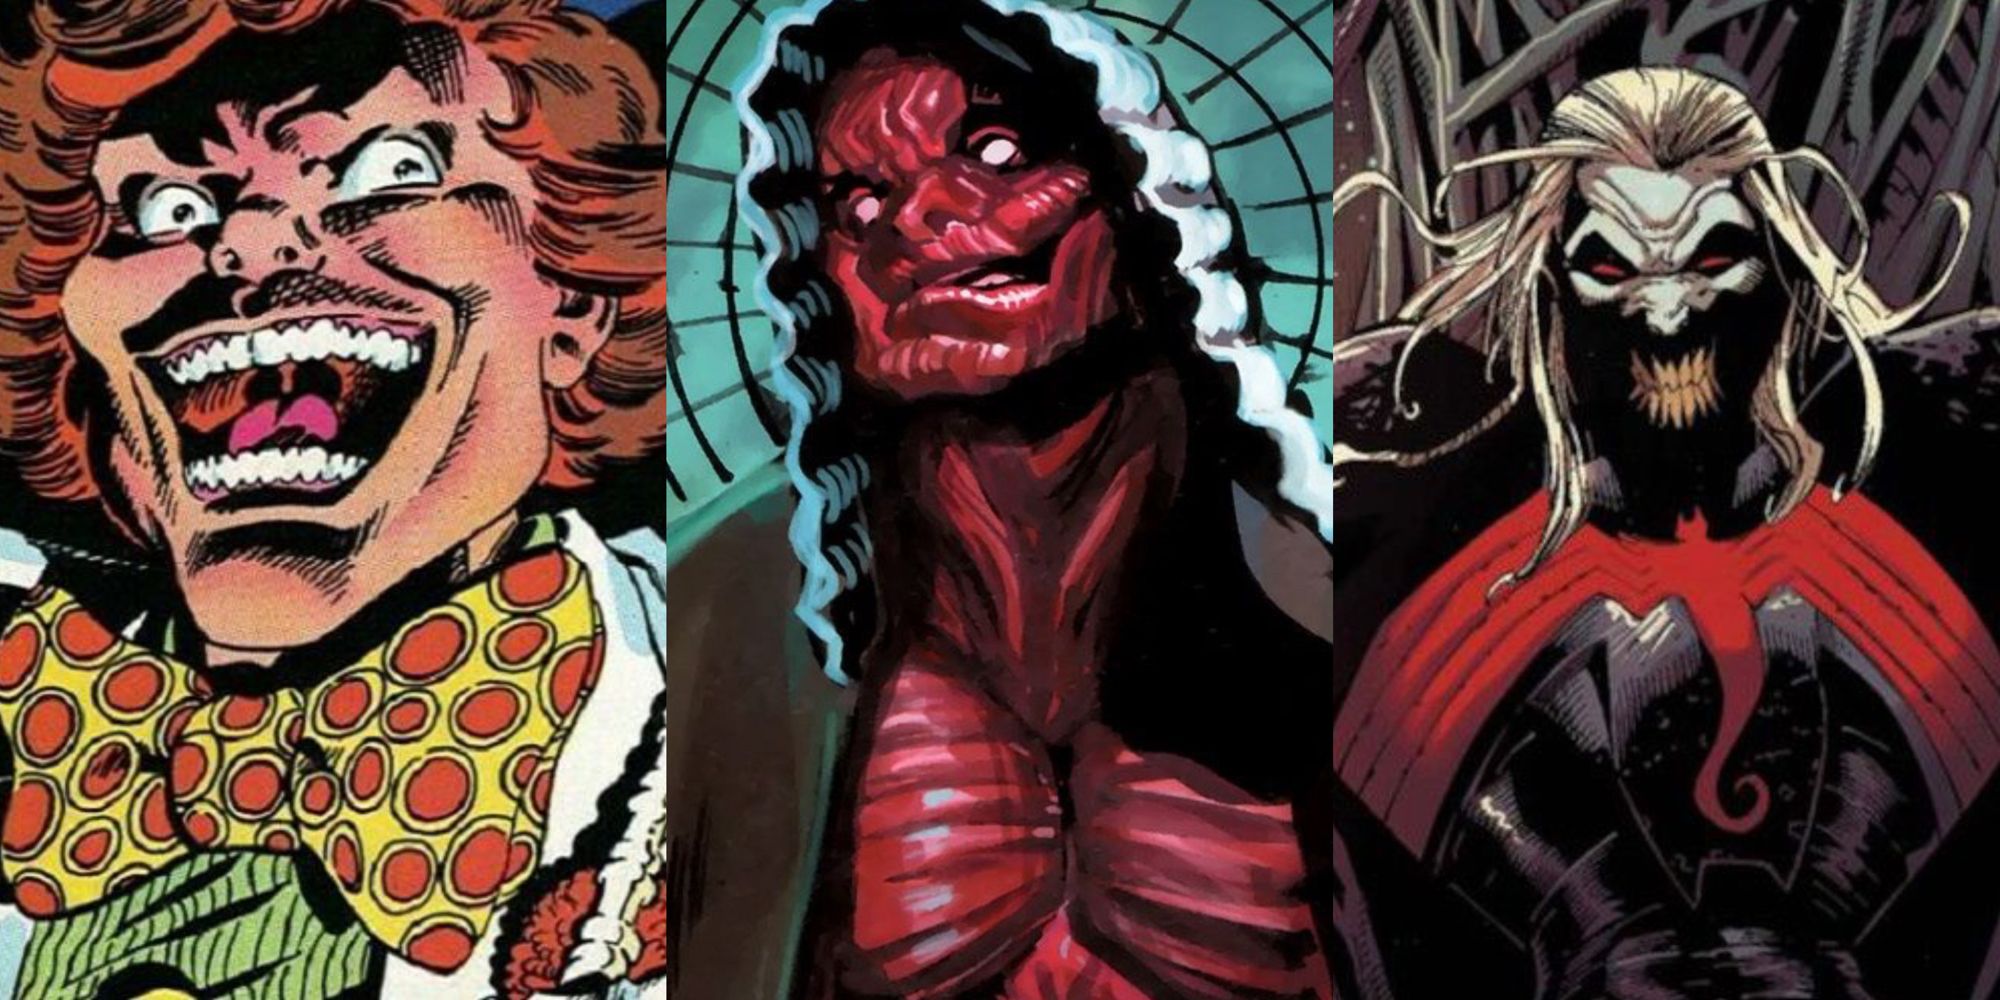 Arcade, Skinless man, and Knull - villains the MCU isn't ready for